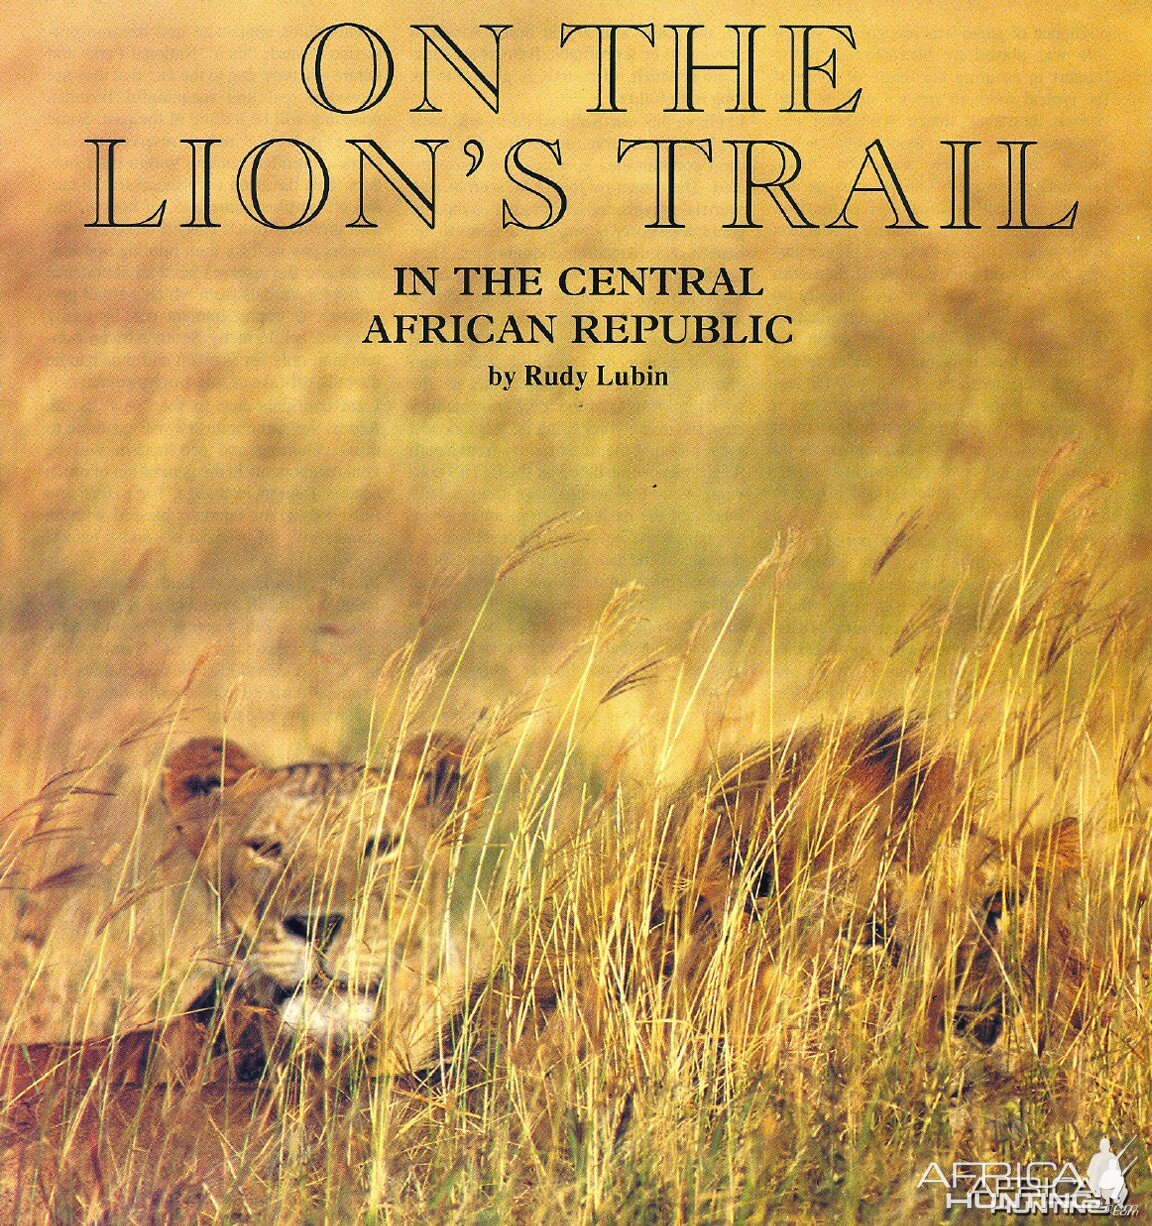 On The Lion's Trail In The Central African Republic by Rudy lubin